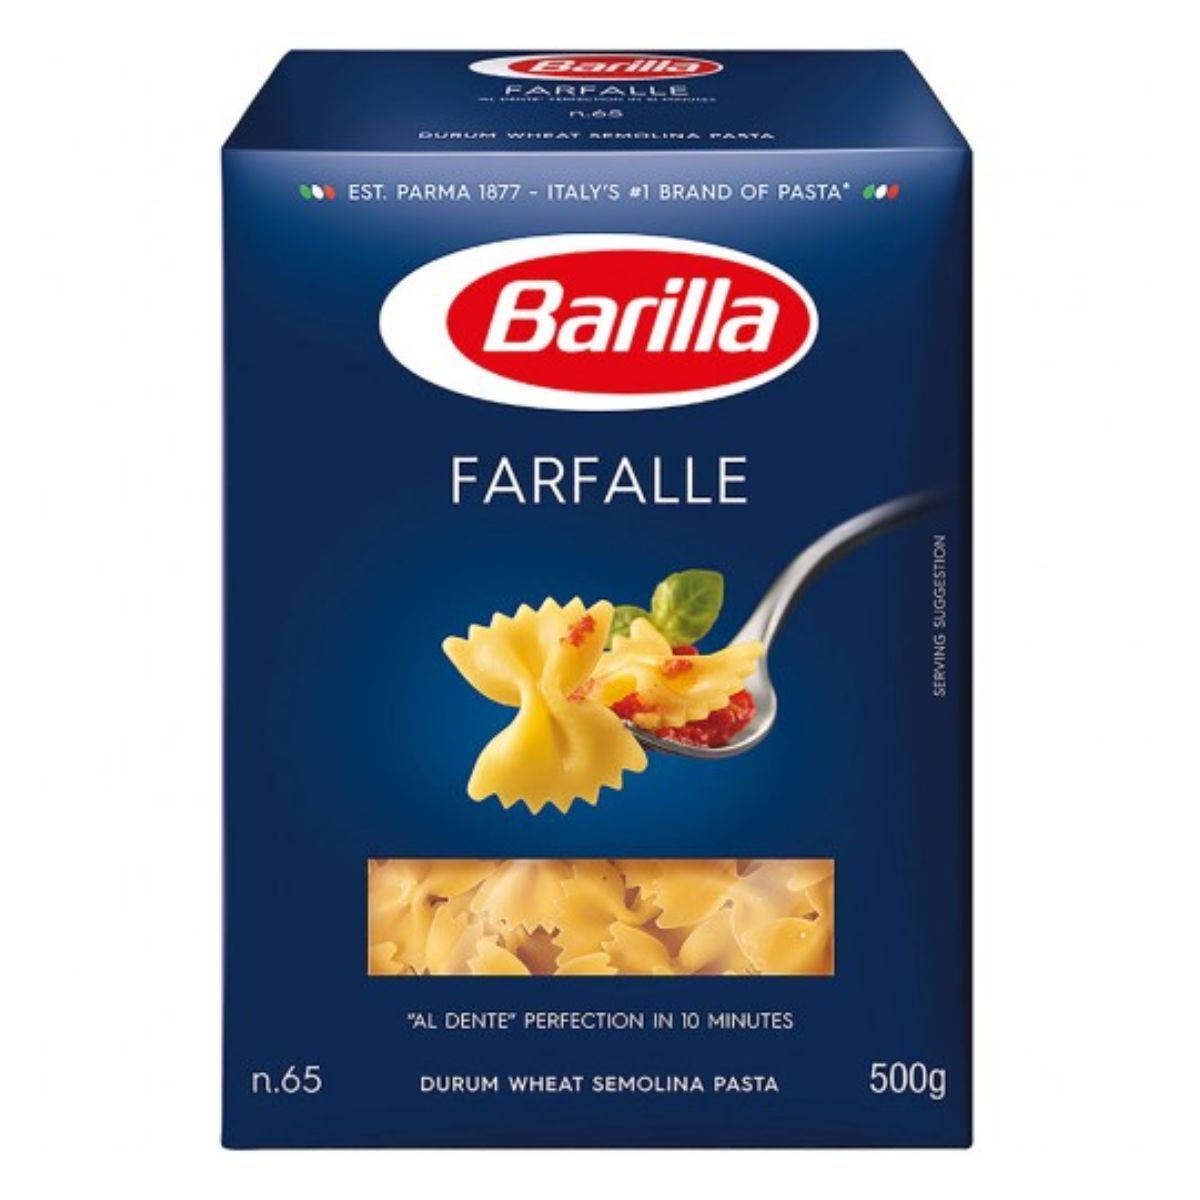 Box of Barilla - Farfalle Pasta - 500g with a depiction of the product and tomatoes and basil on a fork.